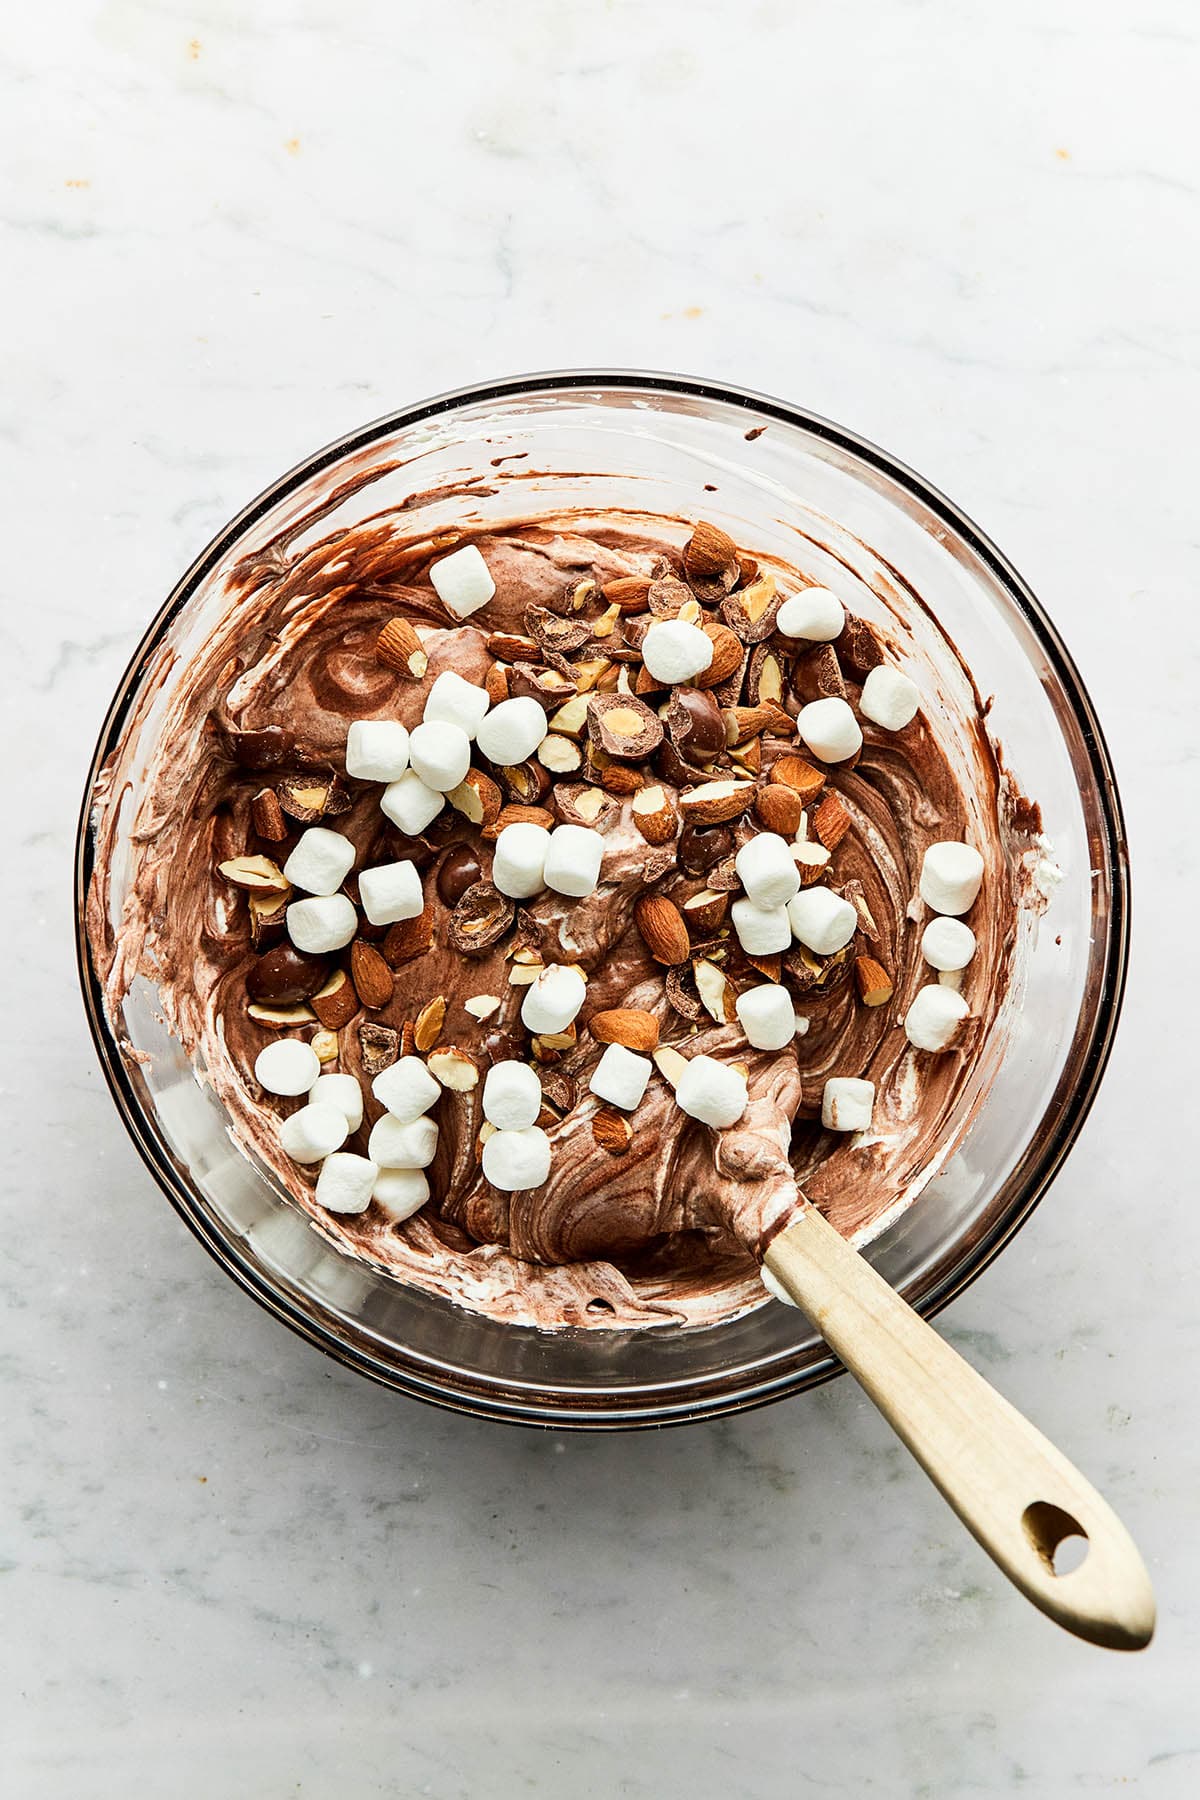 A bowl of fluffy chocolate batter topped with toasted almonds, chocolate covered almonds, and mini marshmallows.